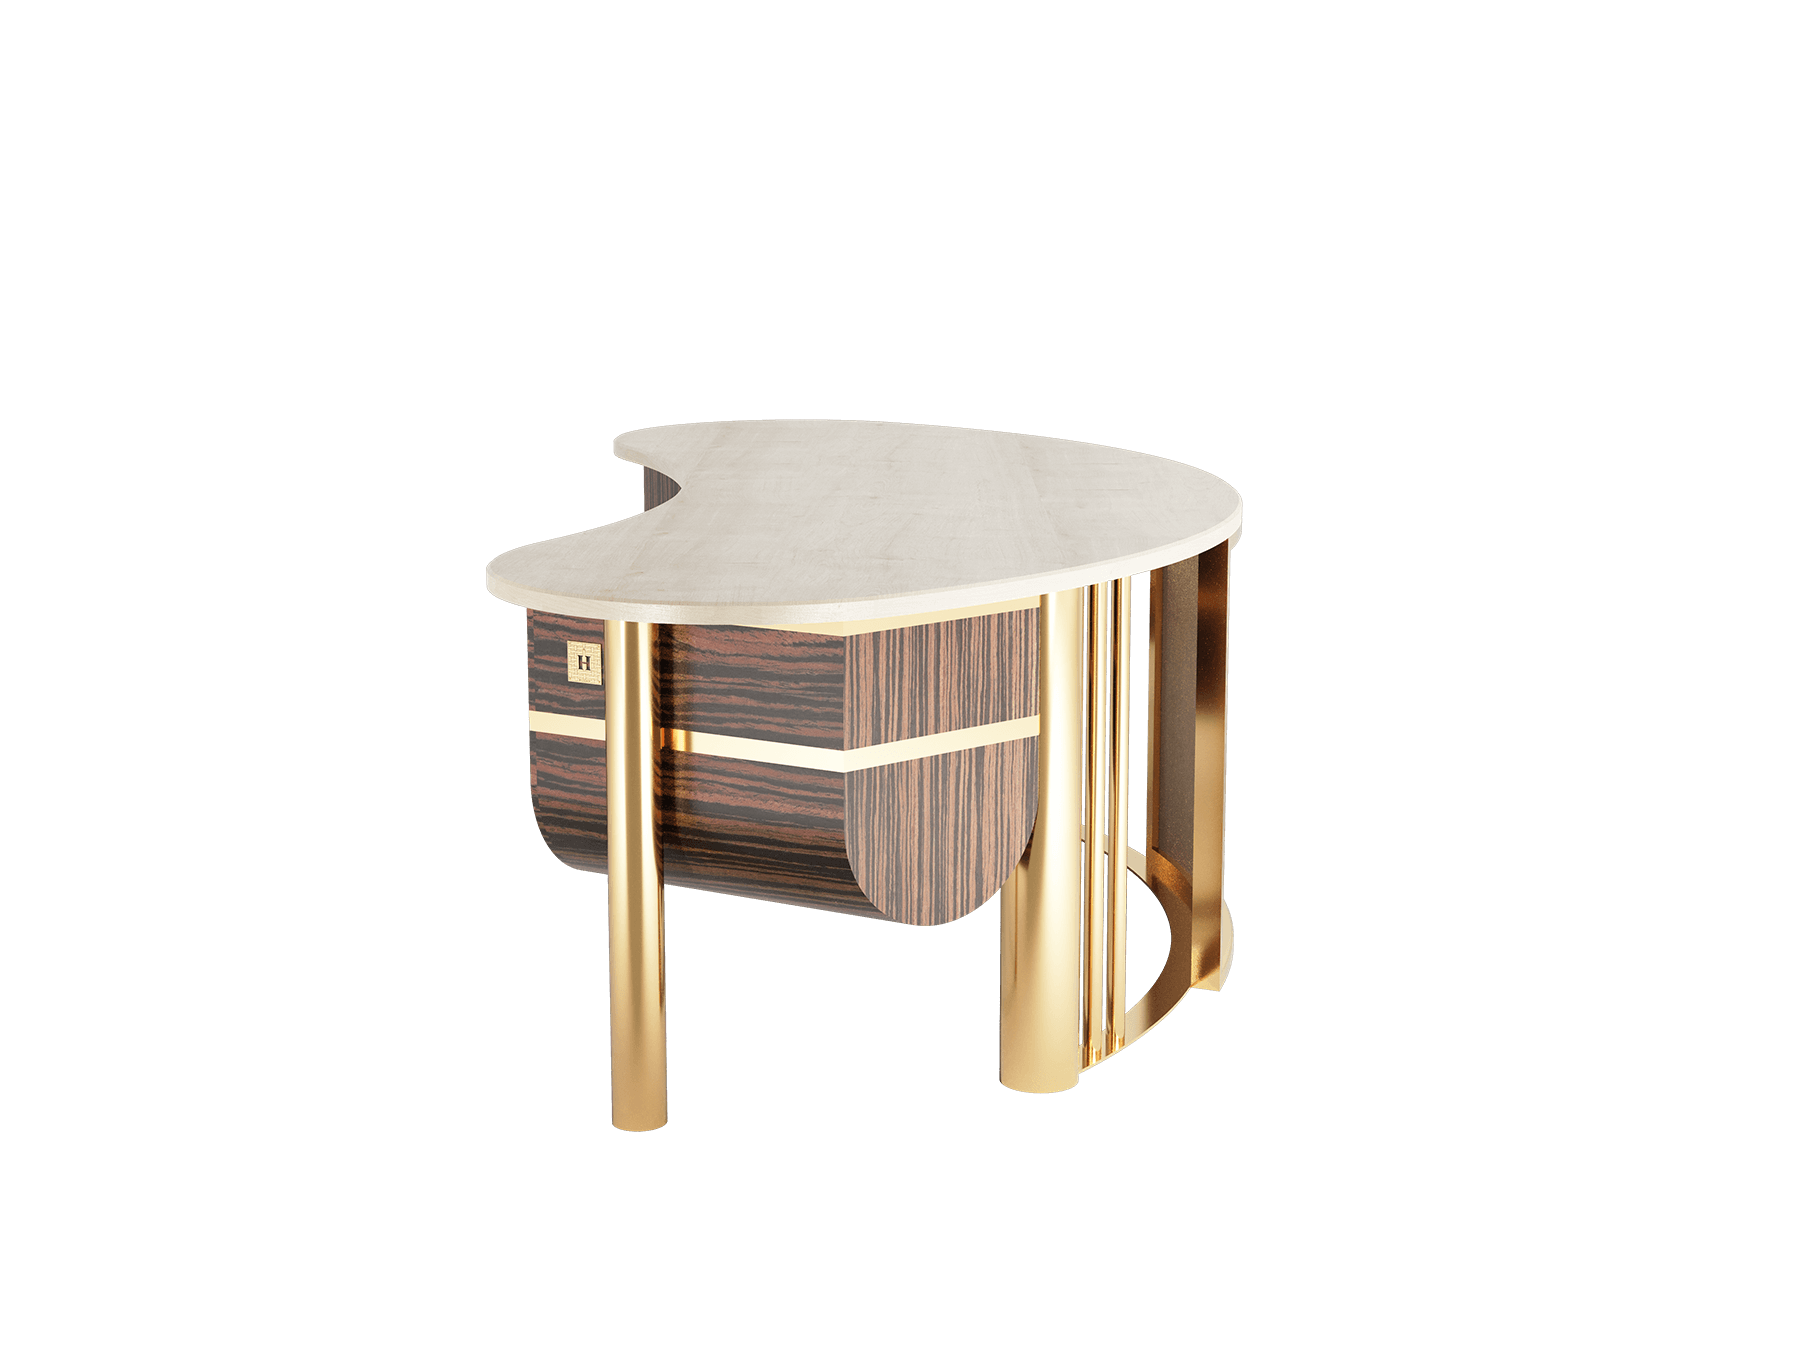 luxury office desk for sophisticated chic style